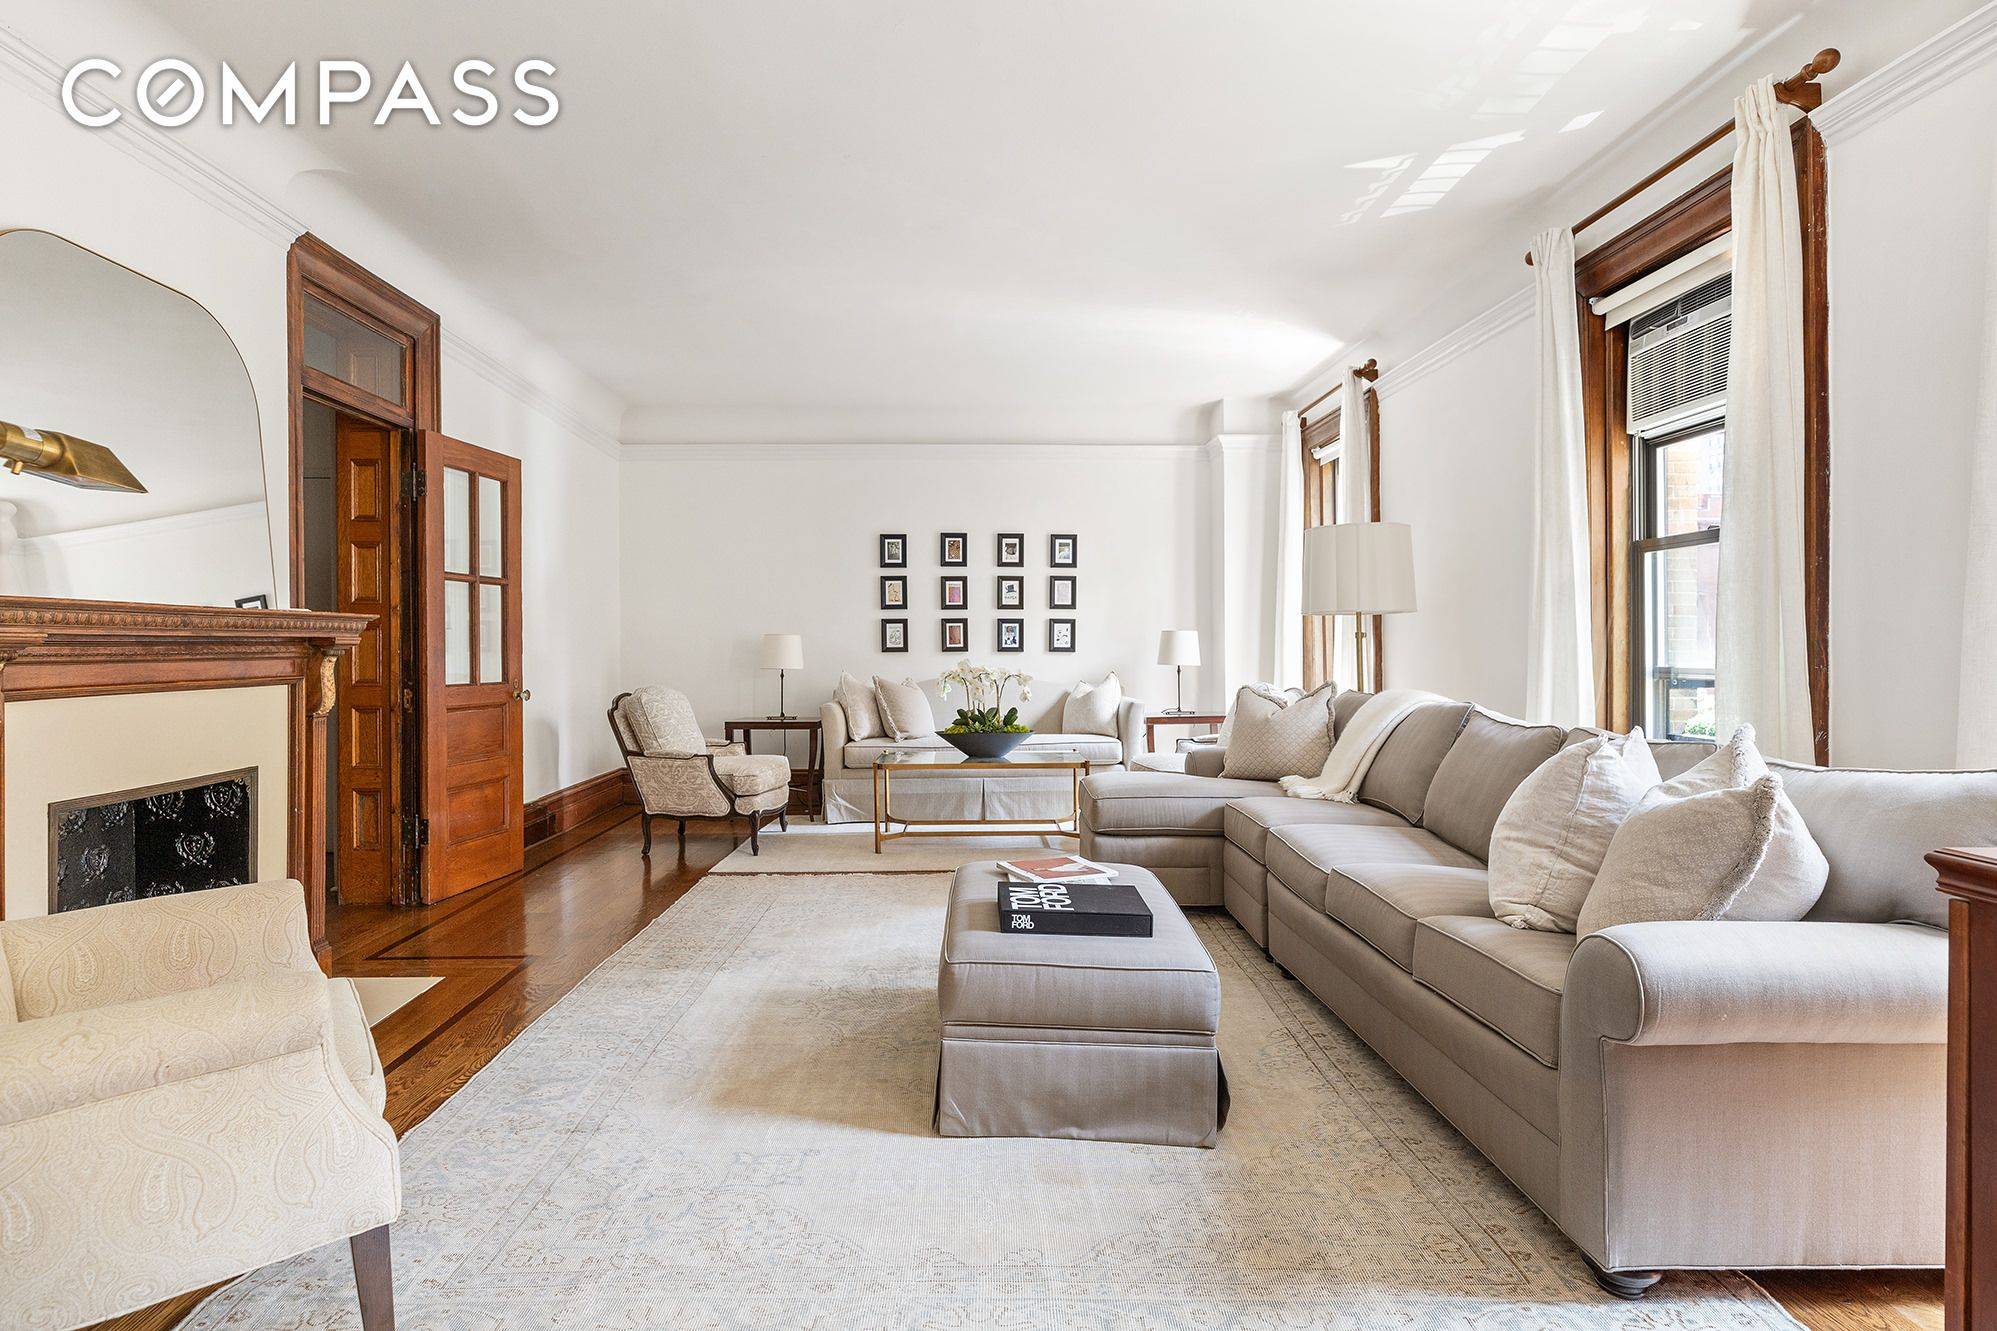 Welcome to this stunning, historic 3 4 bedroom, 2 bathroom home just half a block from Central Park.